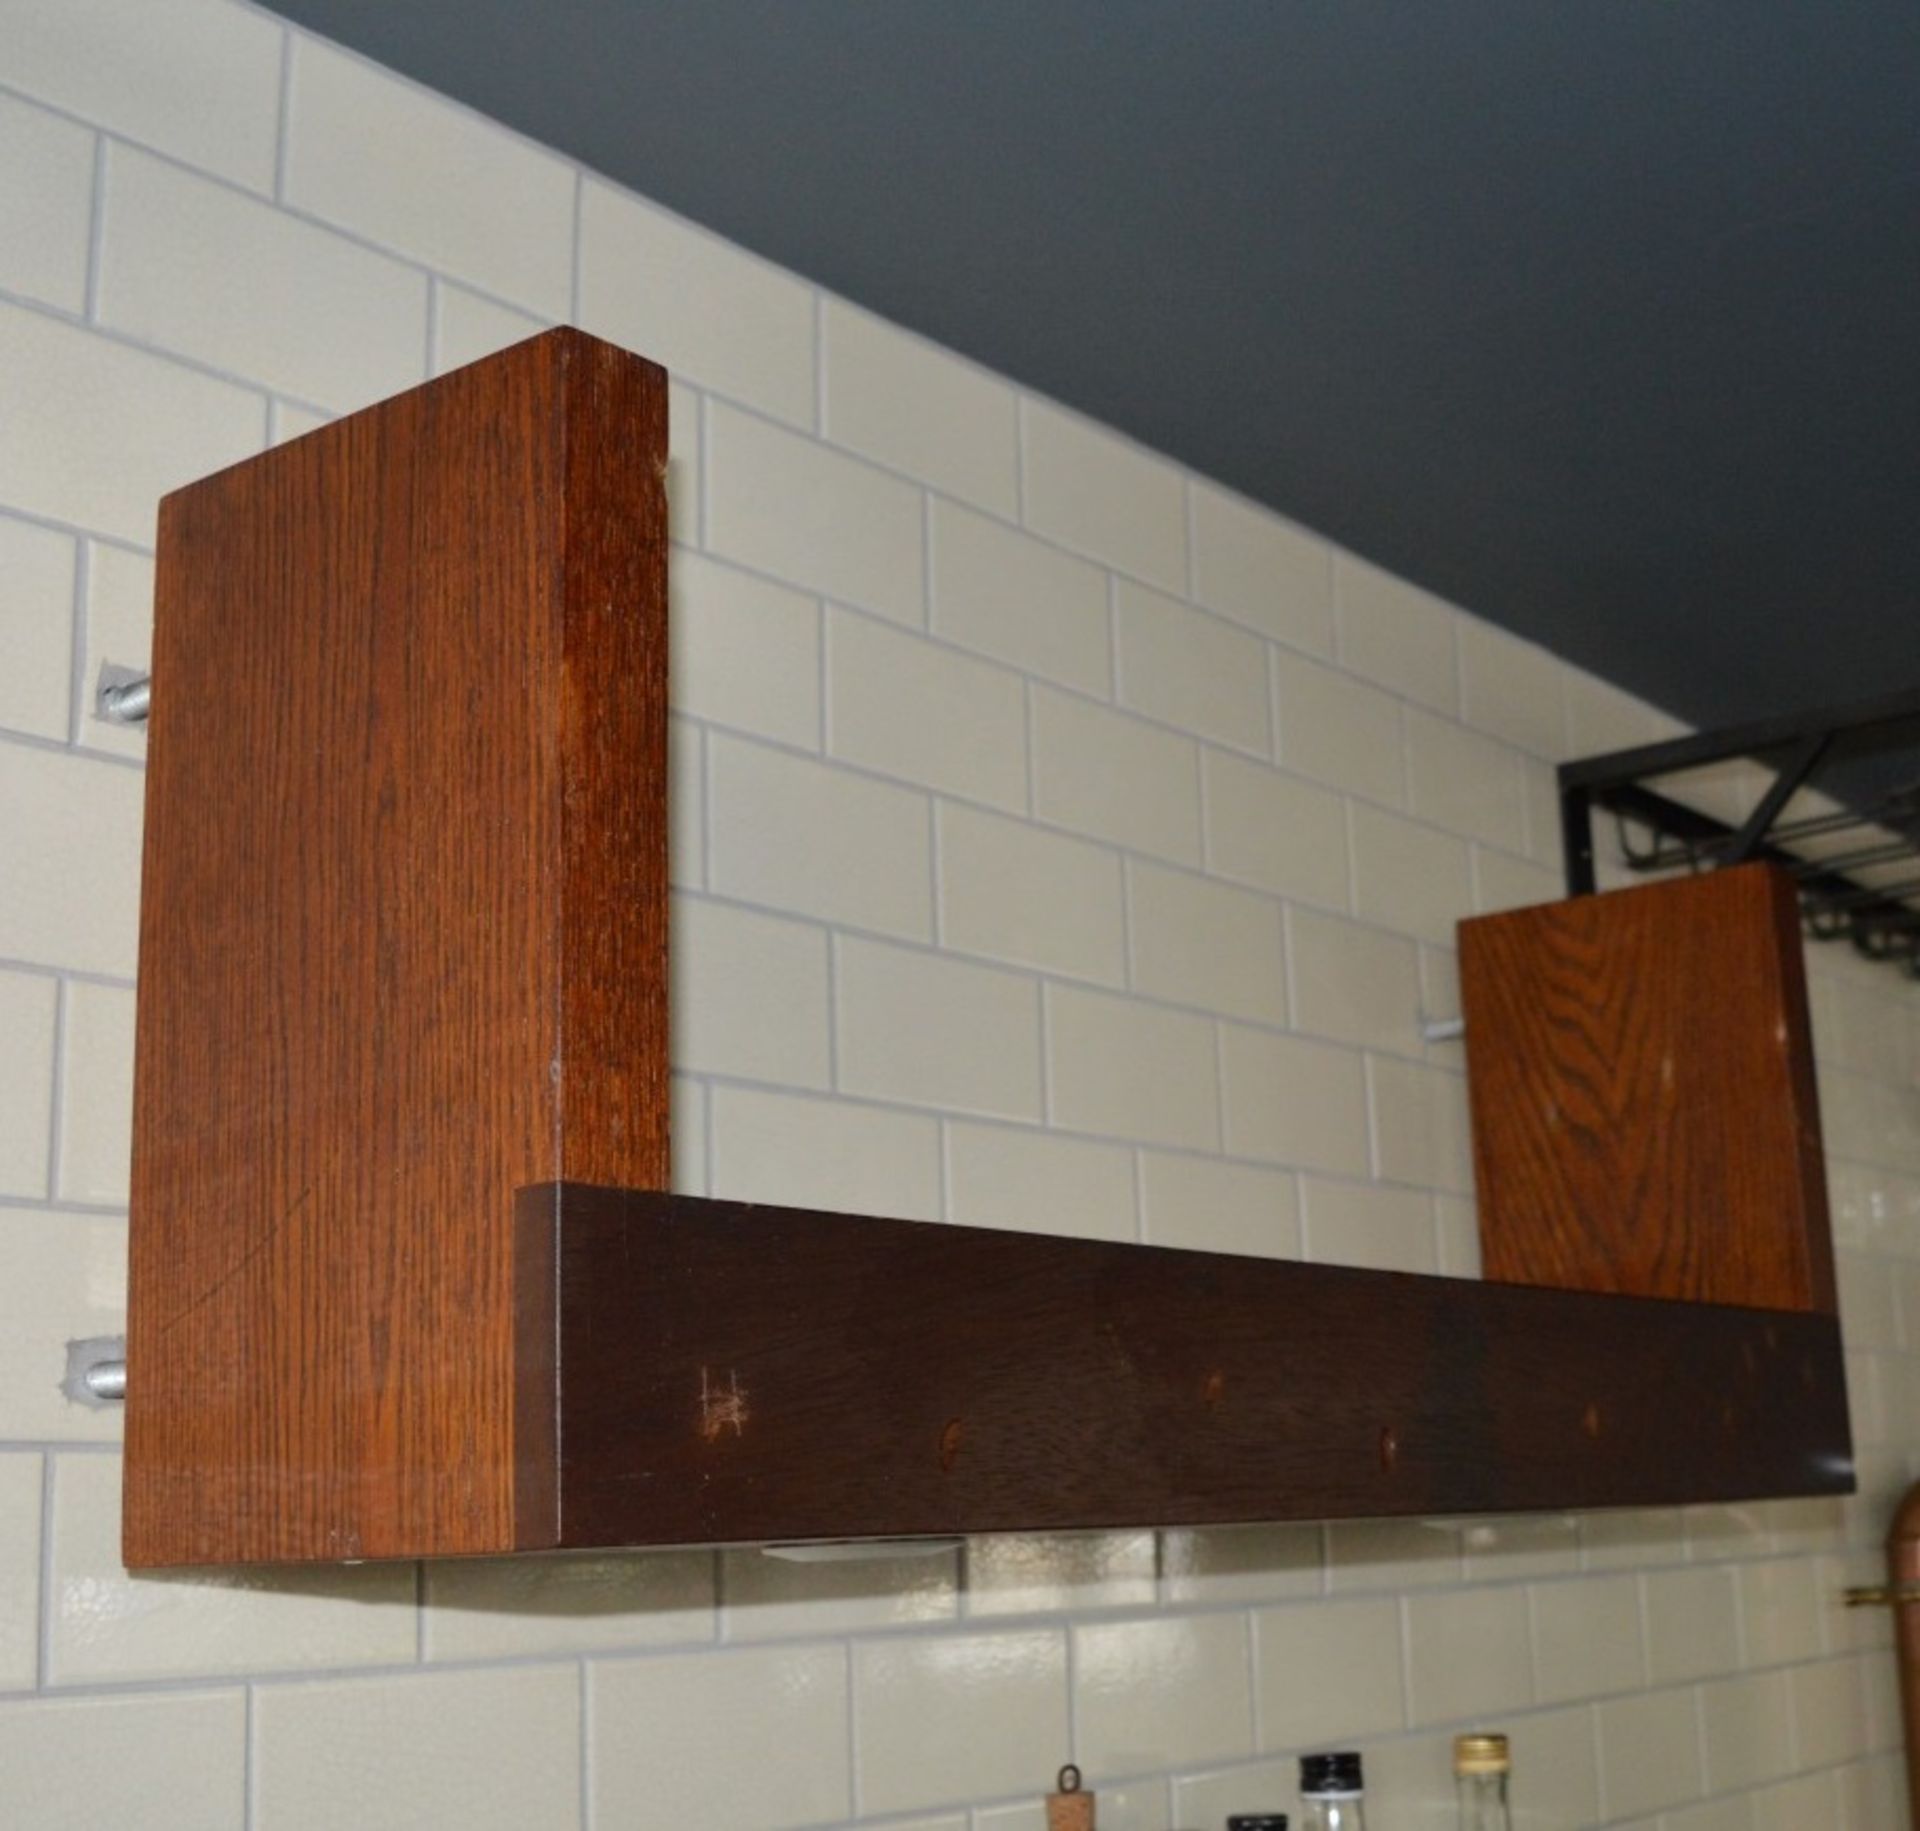 3 x Wooden Wall Shelves - CL245 - Location: London EC4M - Image 2 of 3